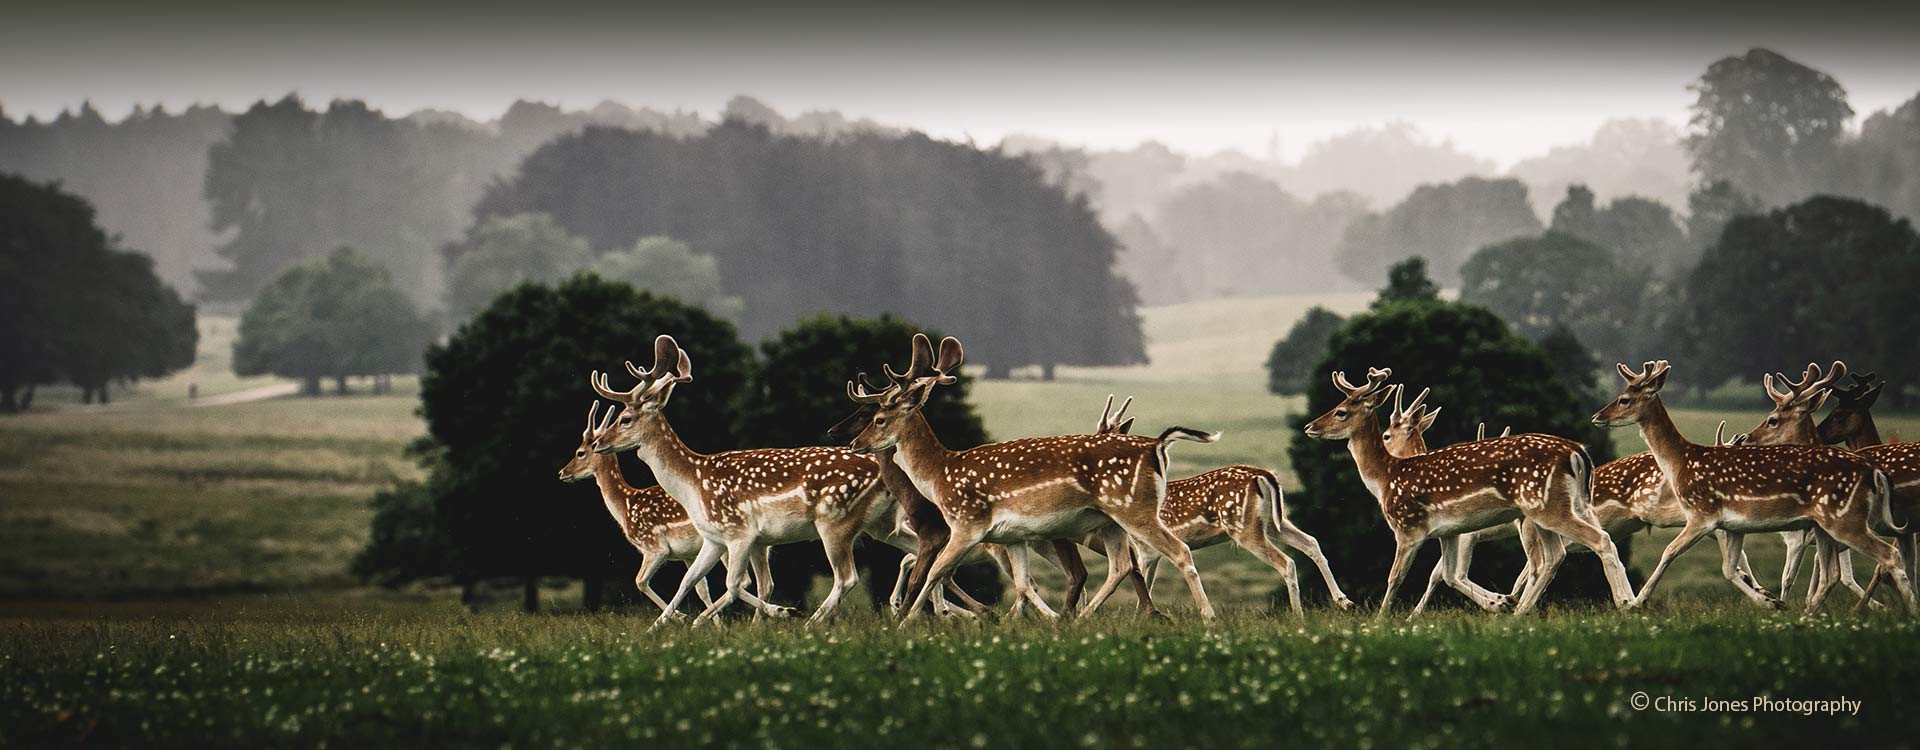 Spotted deer during winter in Tatton Park